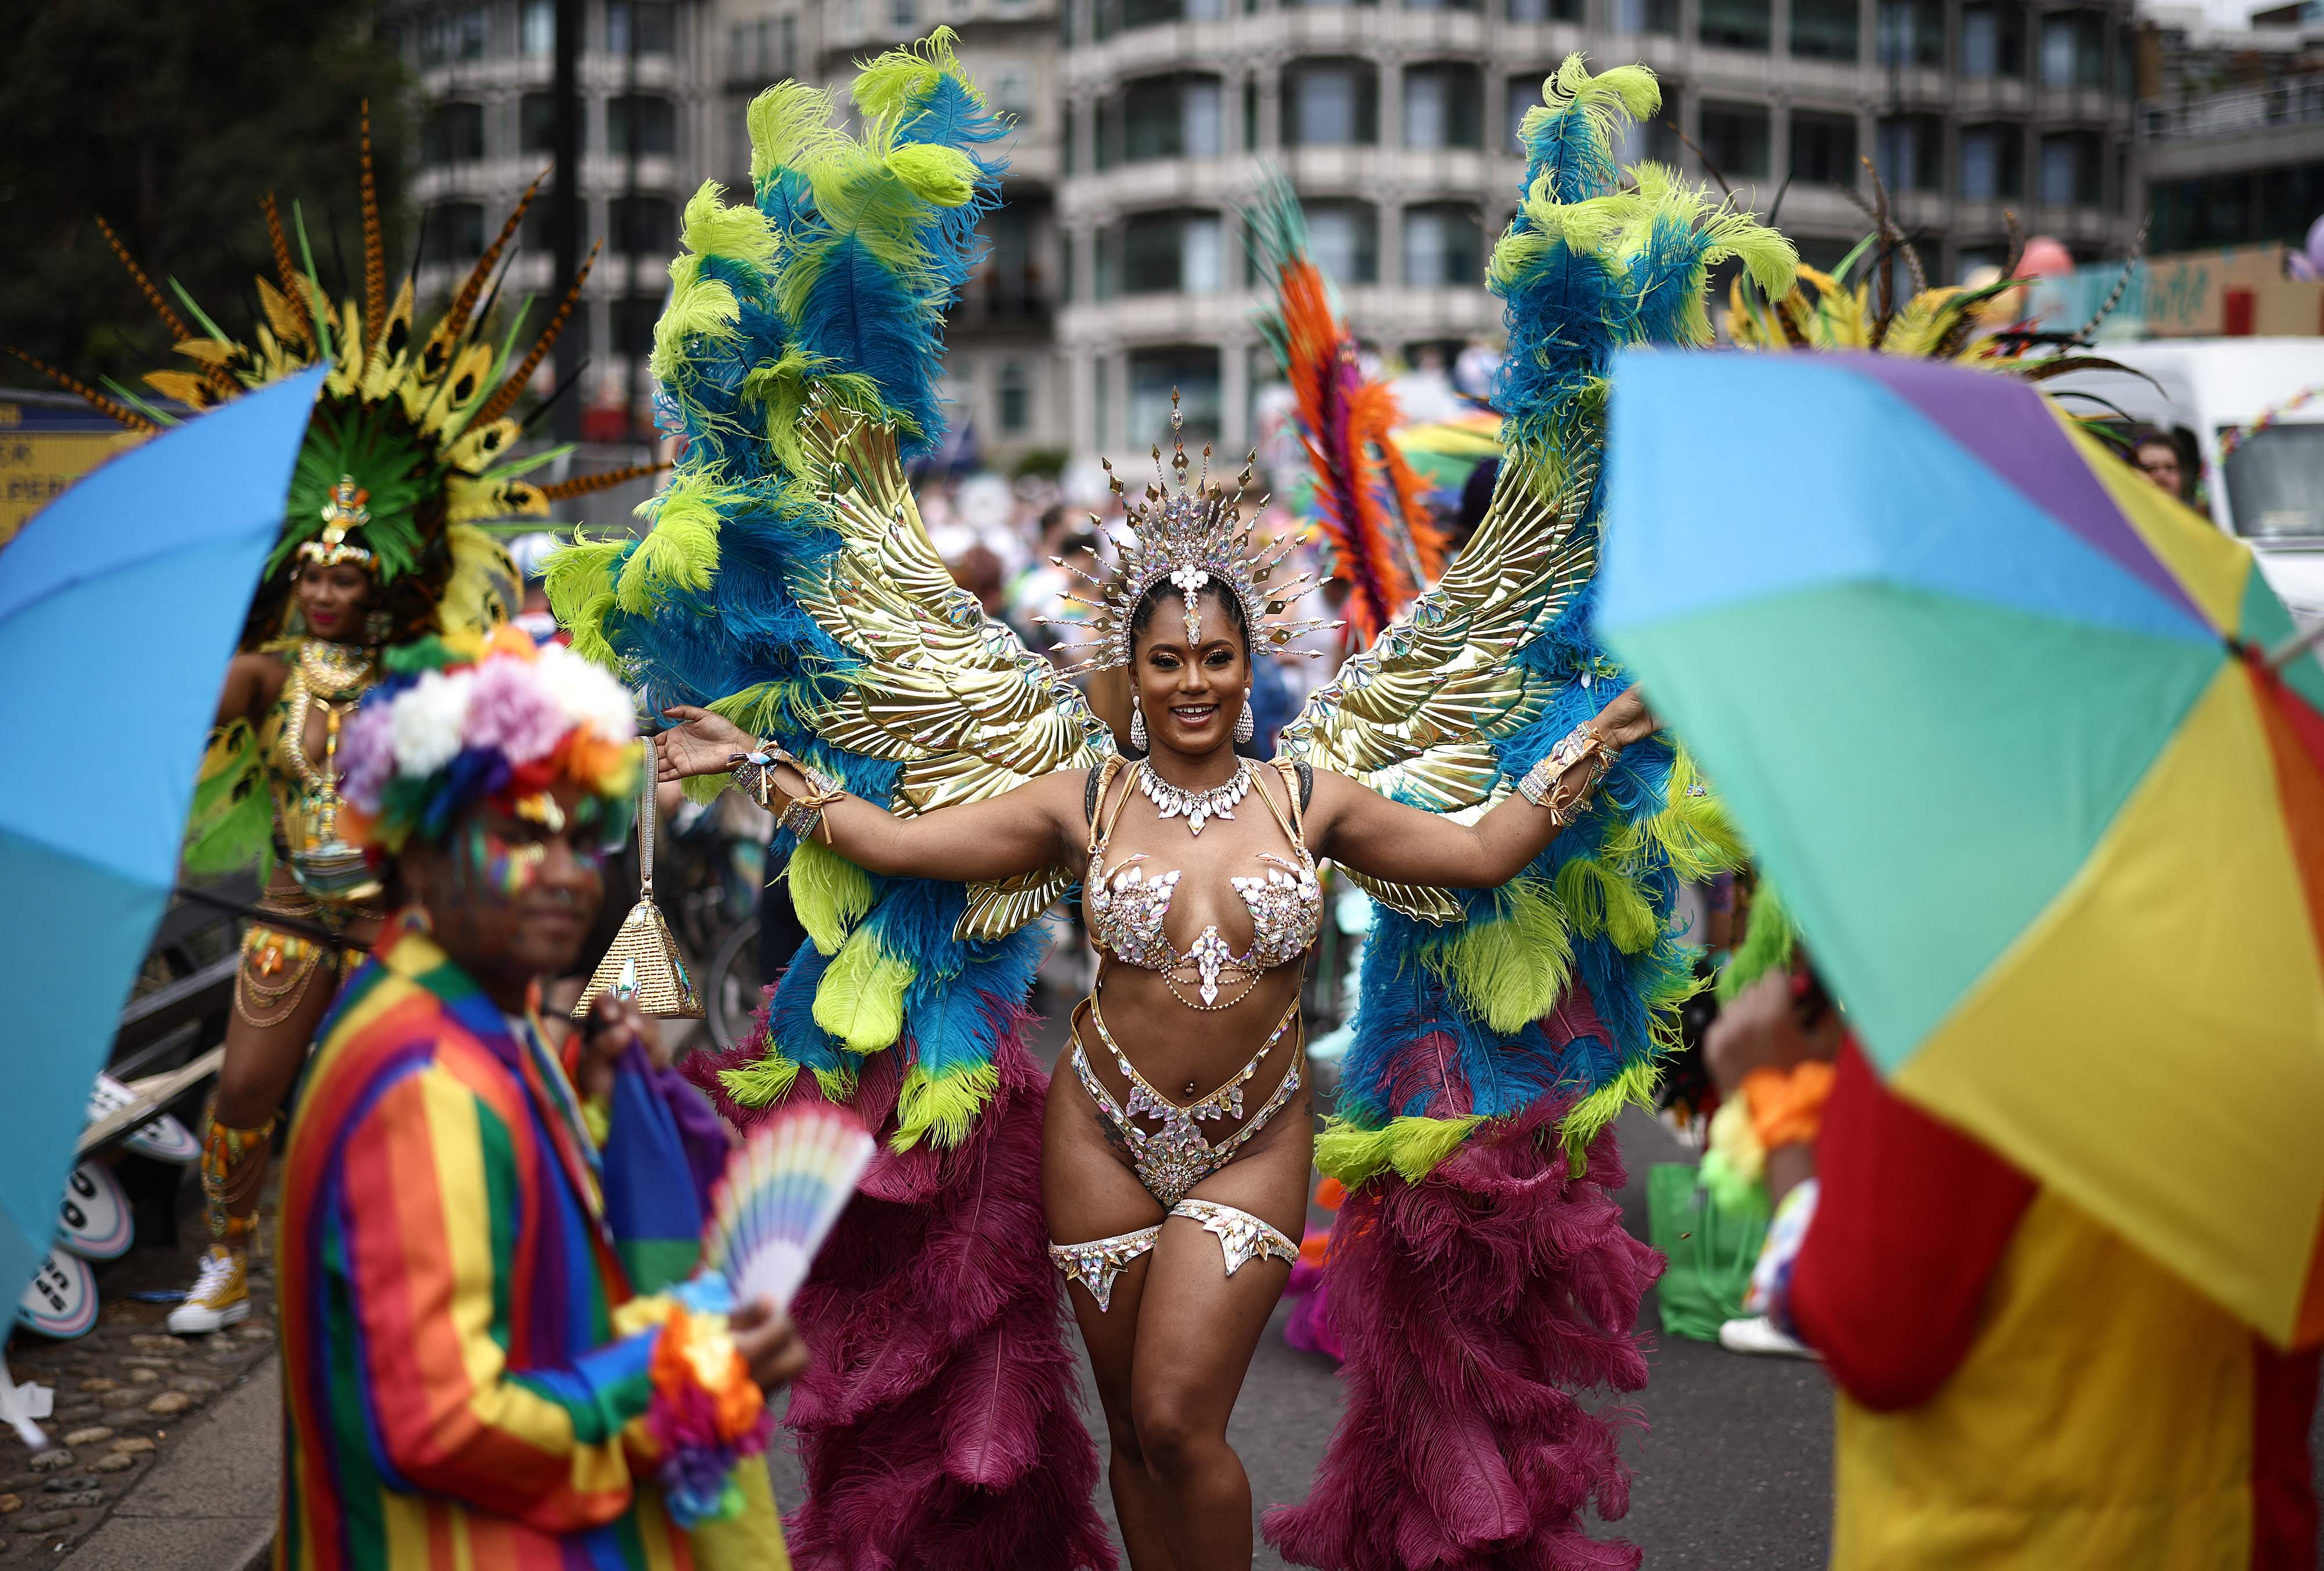 More than one million people are expected at Saturday’s Pride in London parade